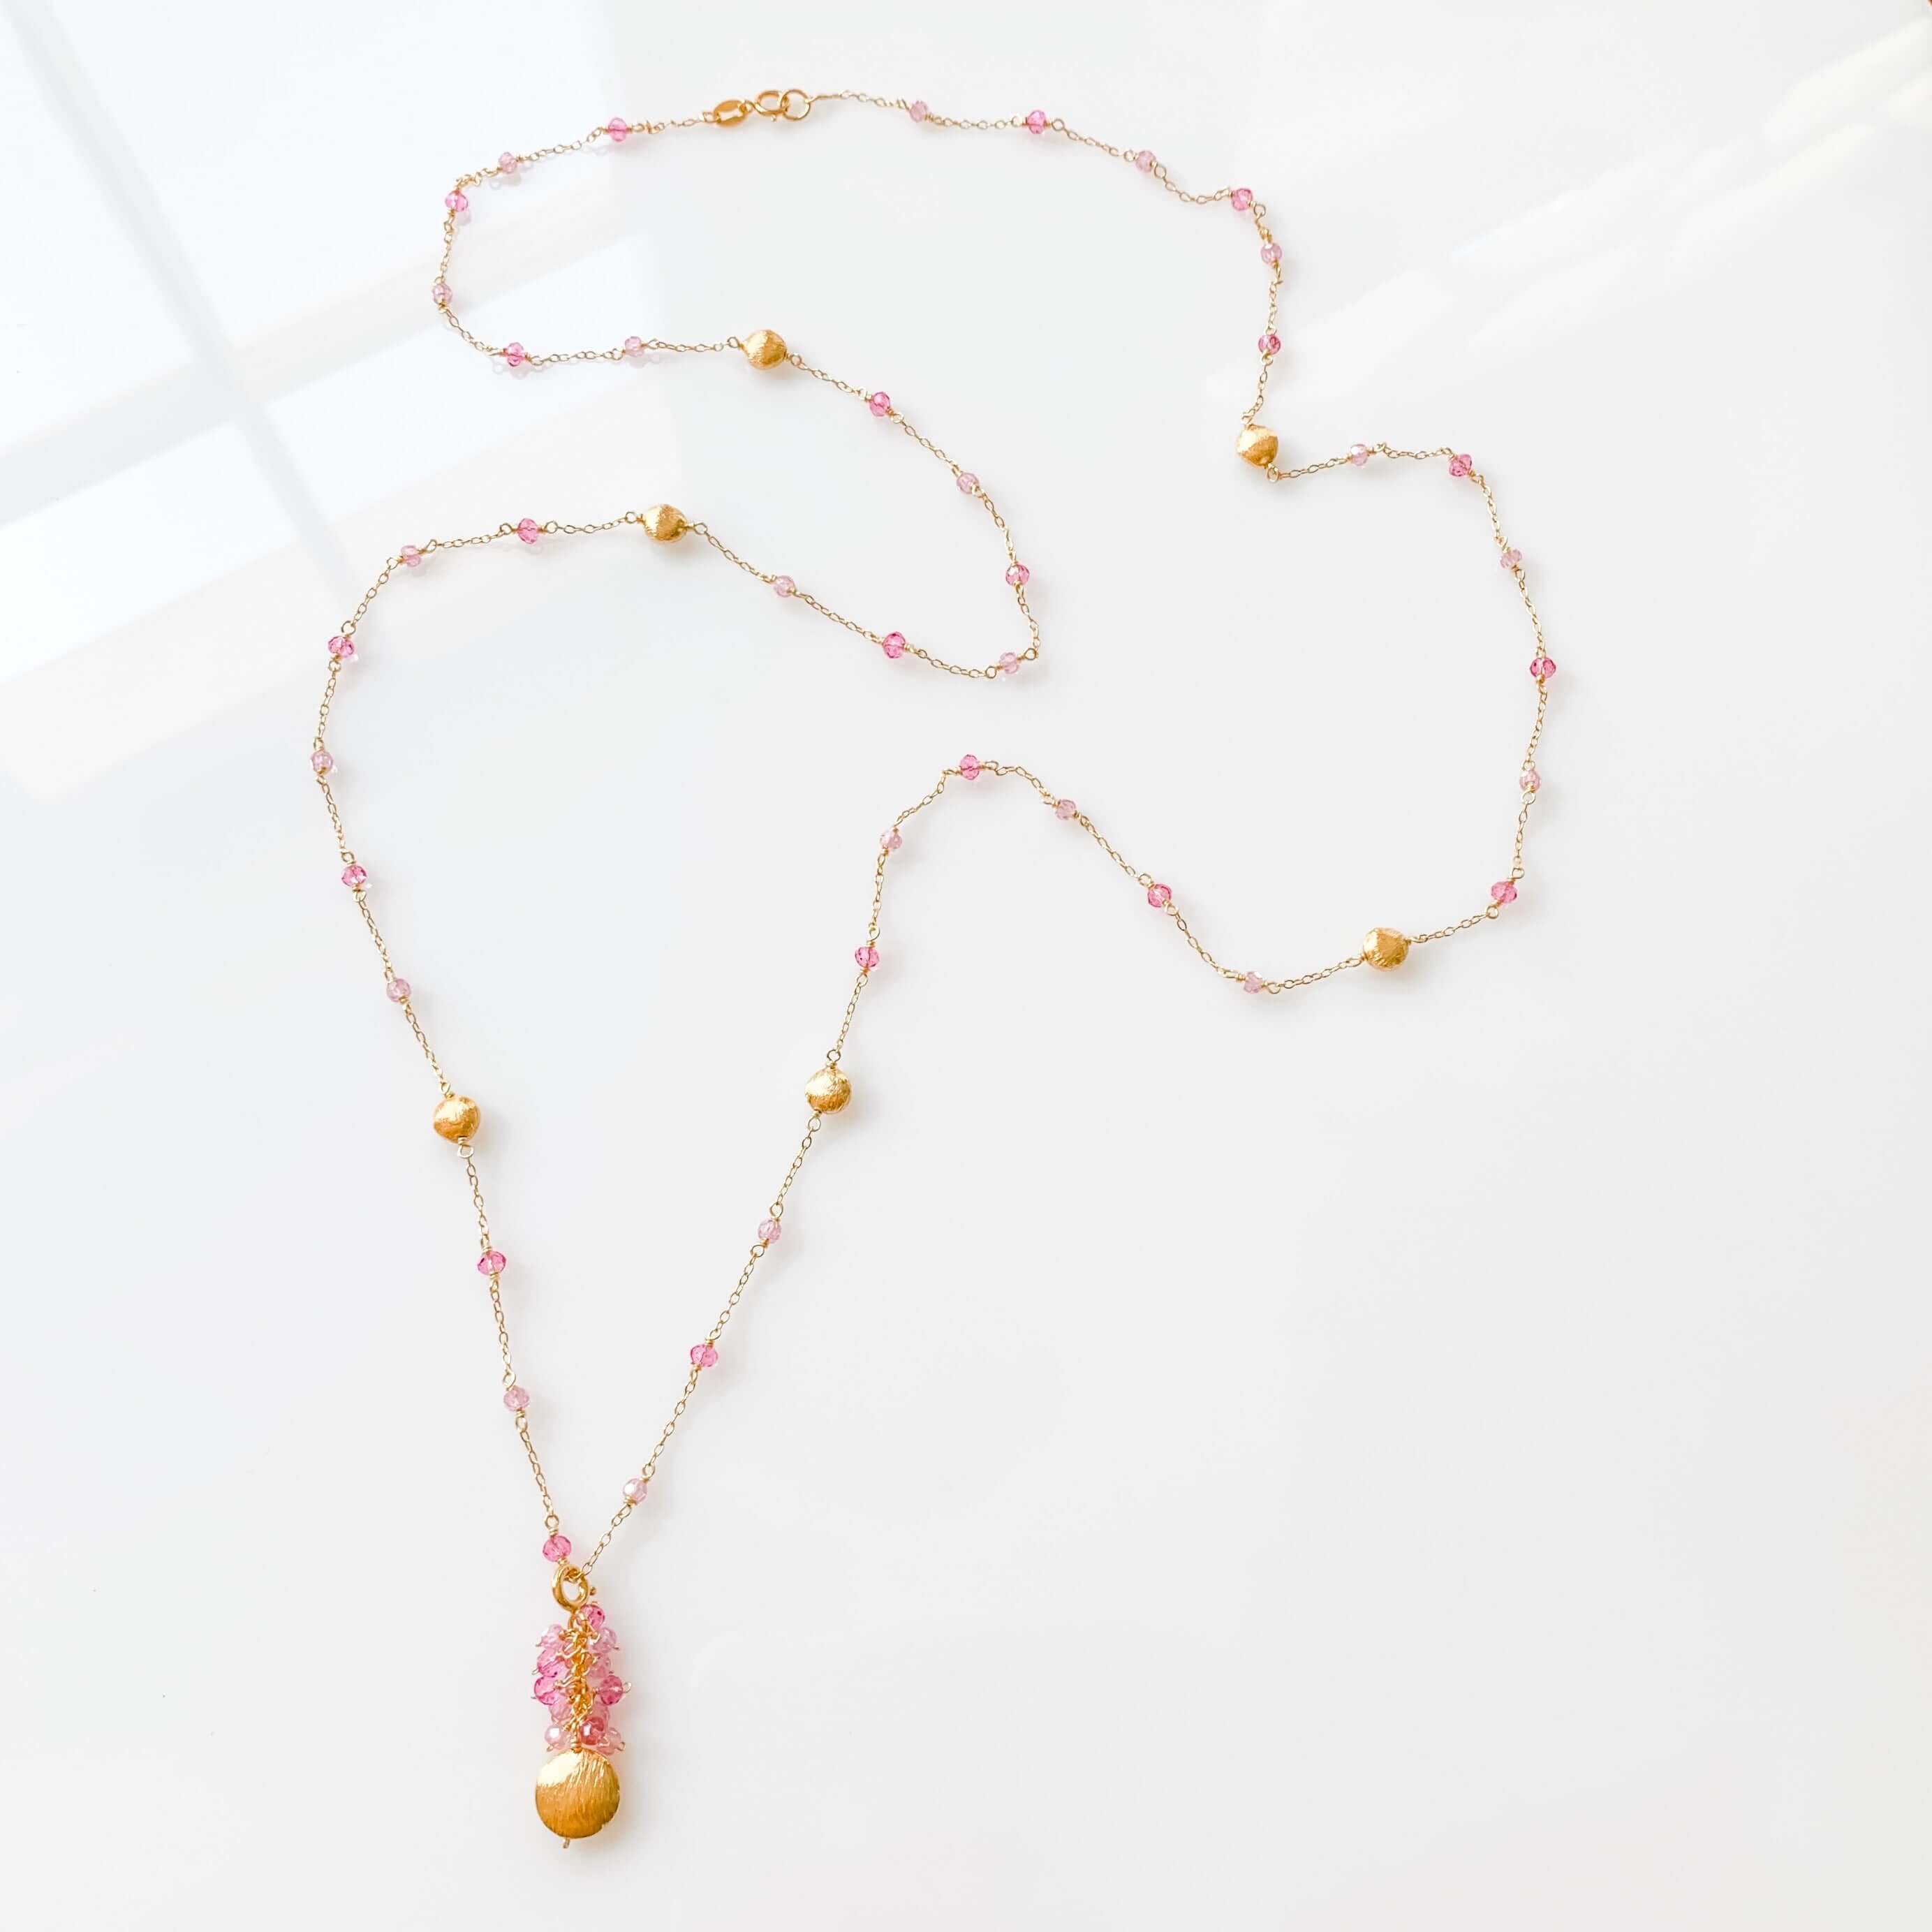 Convertible Gemstone Necklace with Peridot and Pink Quartz